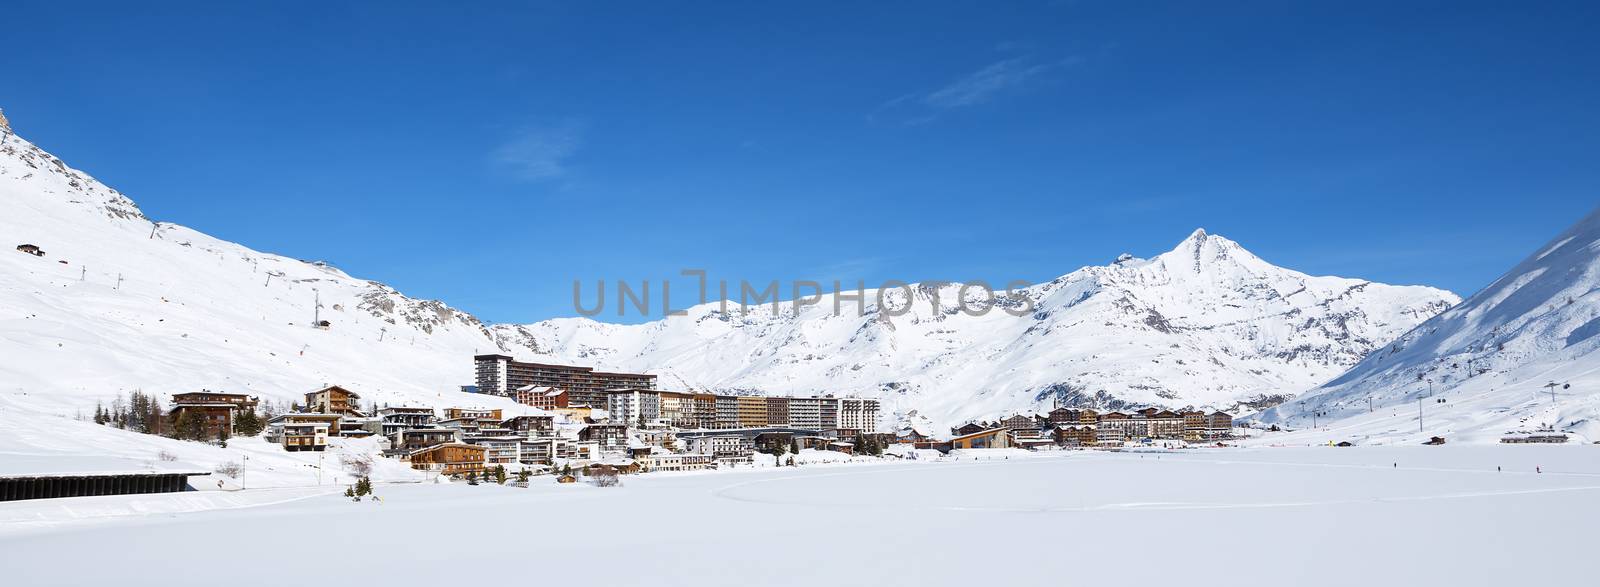 Panoramic view of Tignes village in winter, France.